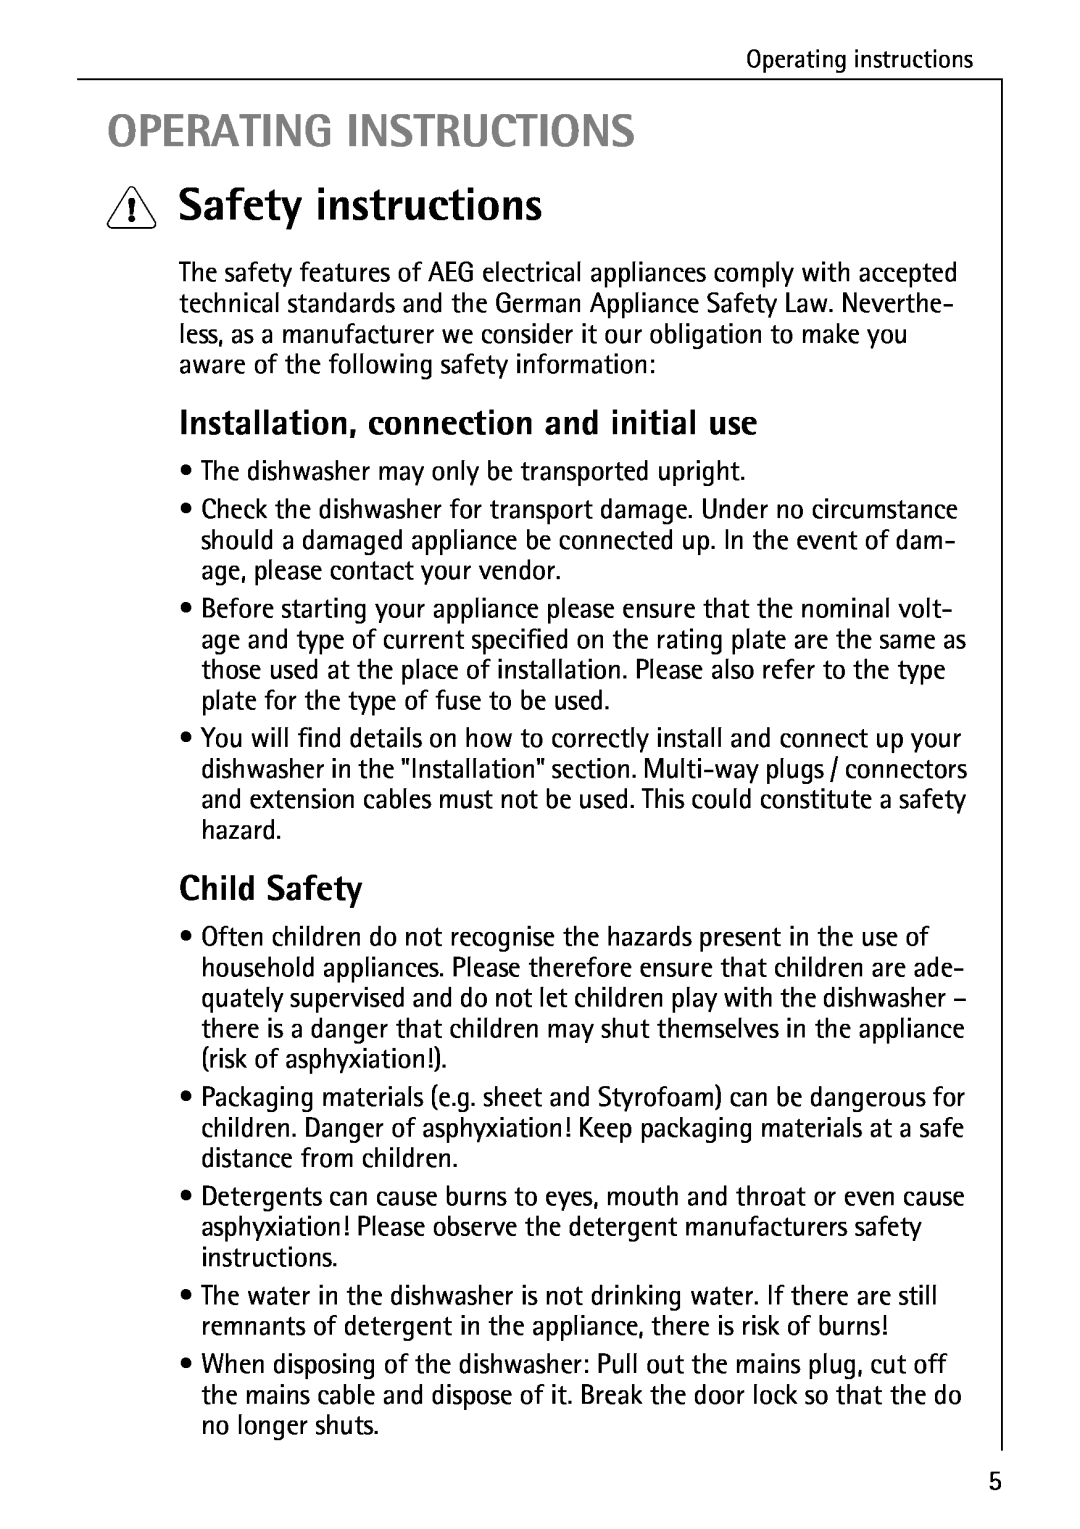 AEG 4270 I manual Operating Instructions, Safety instructions, Installation, connection and initial use, Child Safety 